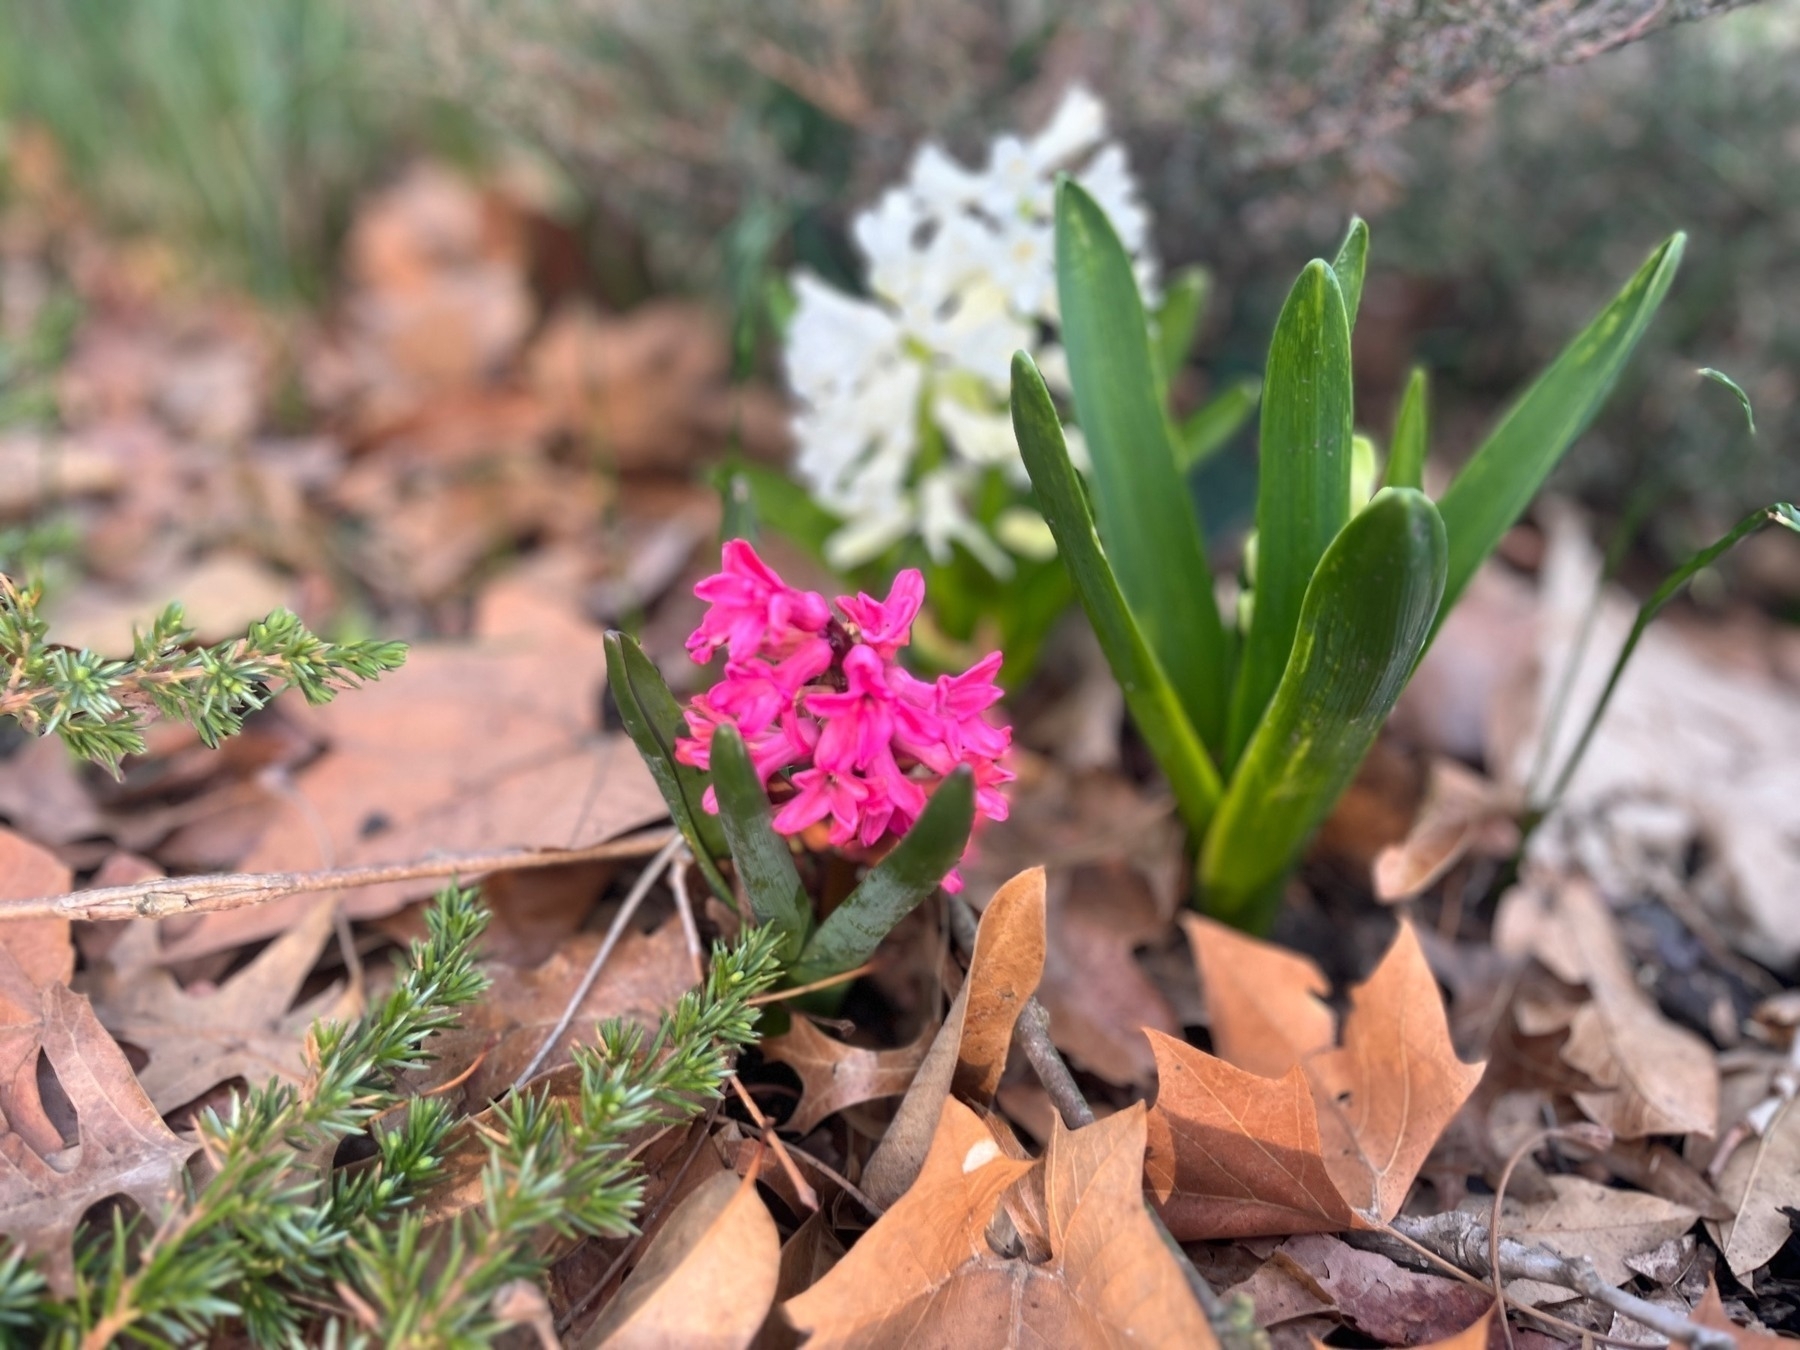 Hyacinths flowering - one small pink, one larger white, one green bud.